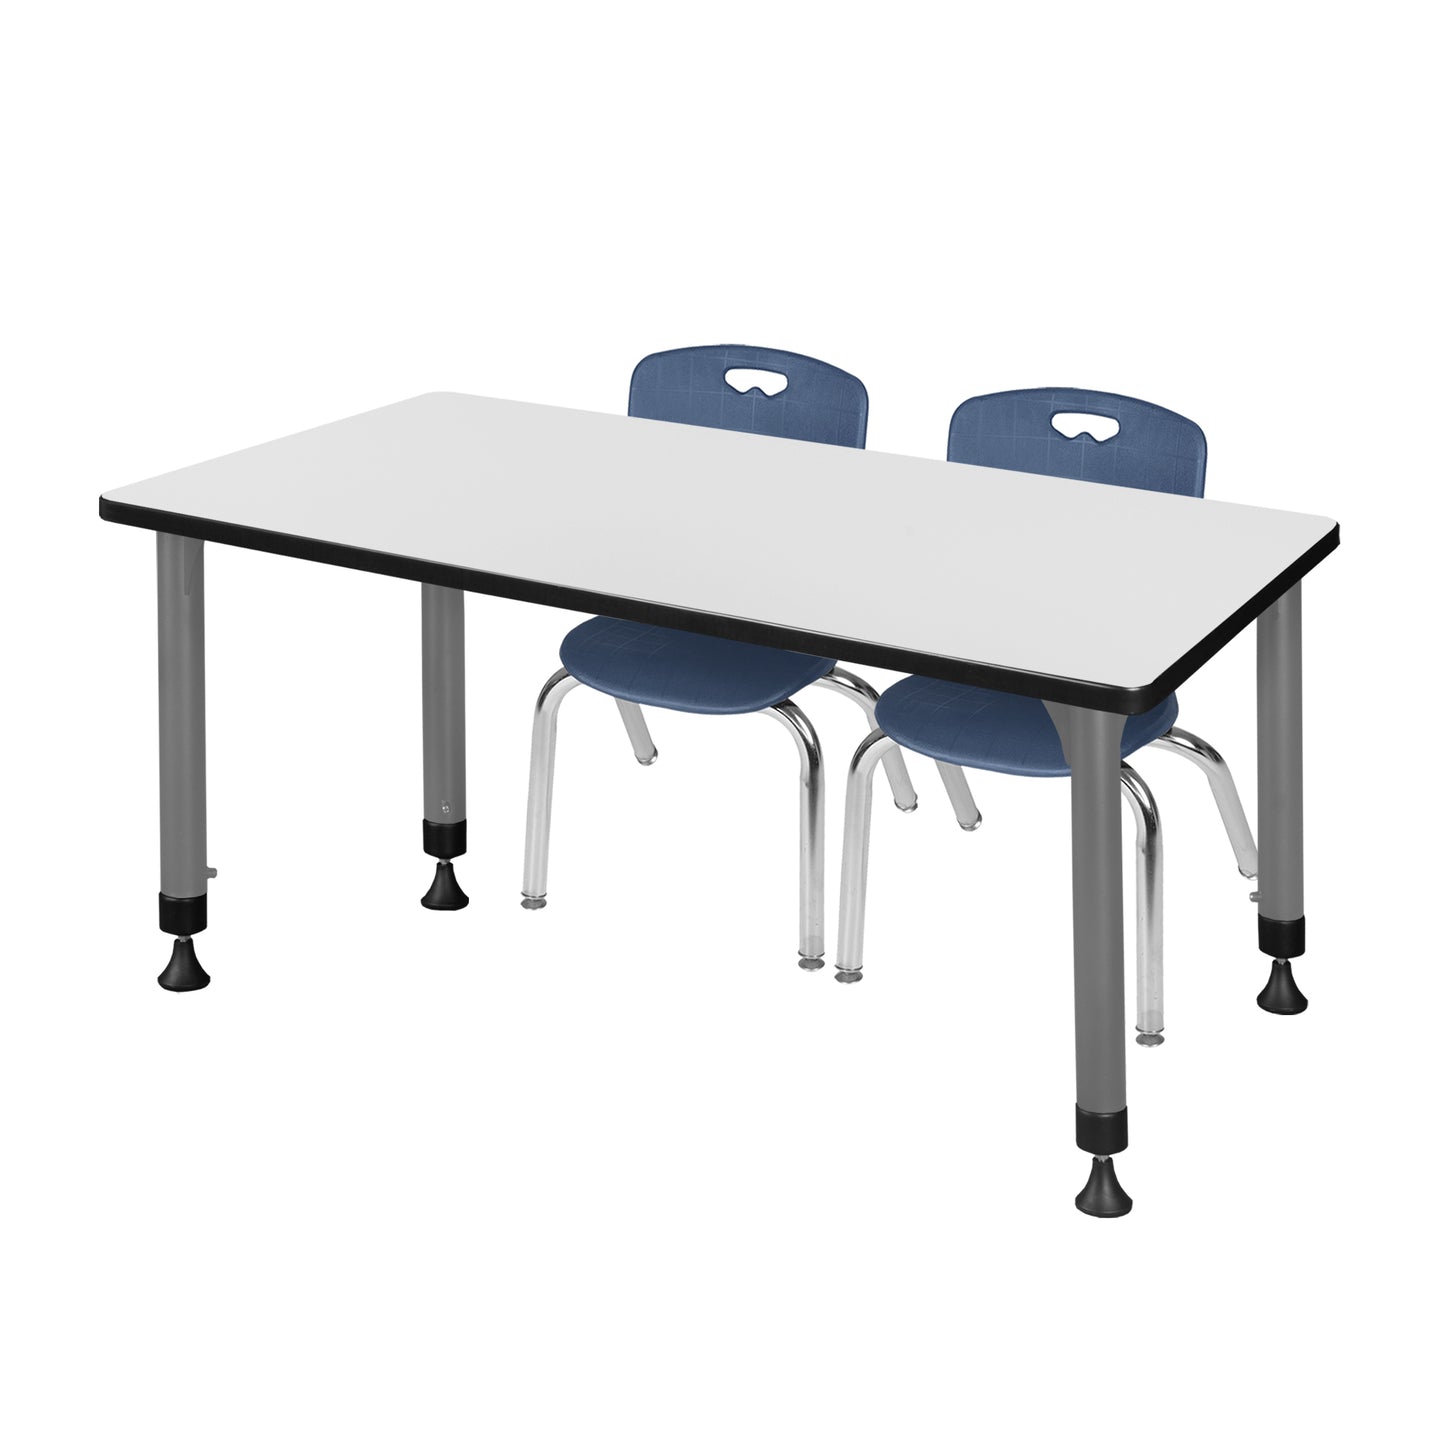 Regency Kee 48 x 24 in. Adjustable Classroom Table & 2 Andy 12 in. Stack Chairs